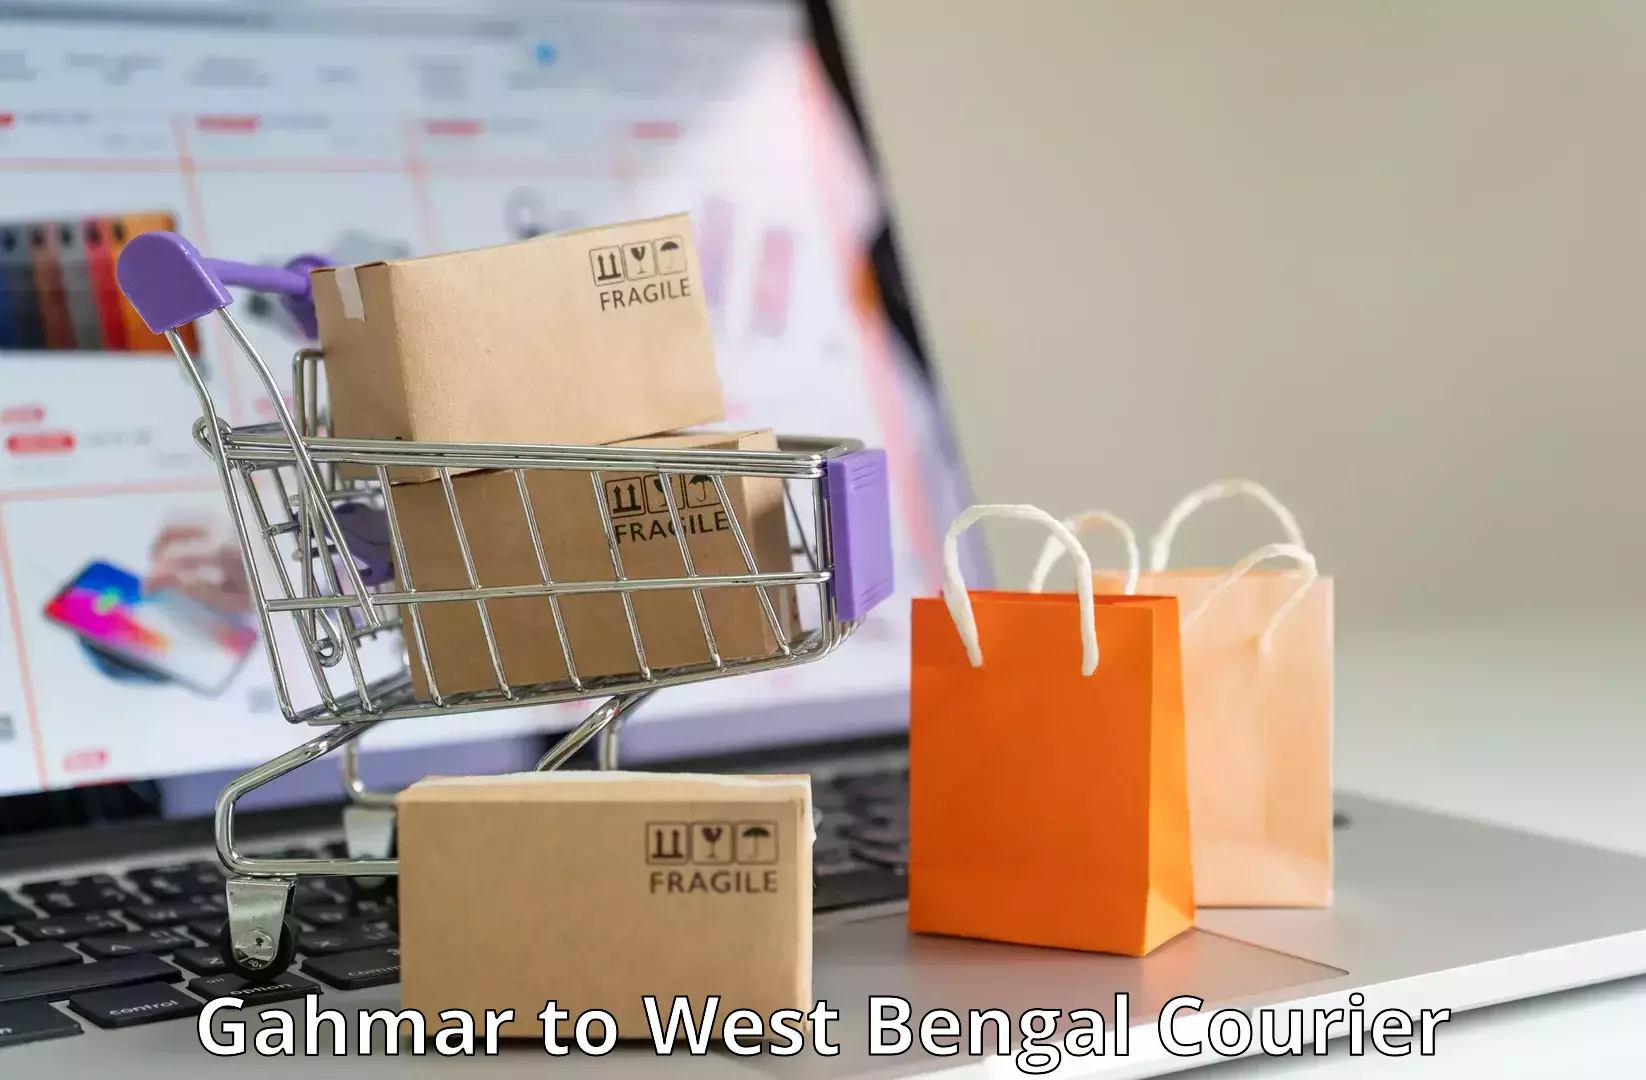 Personal courier services Gahmar to West Bengal